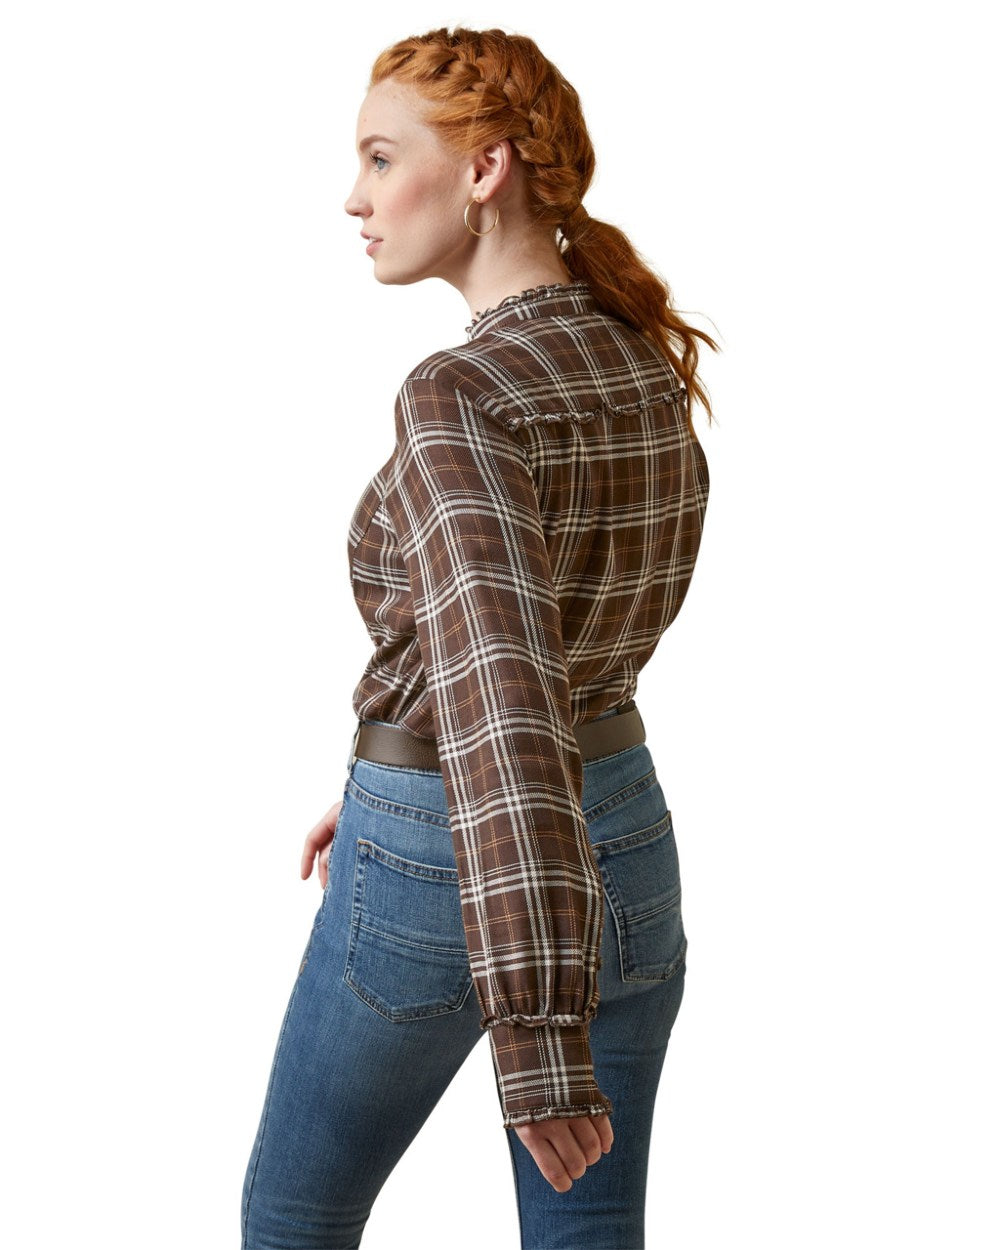 Mole Plaid Ariat Womens Clarion Blouse on White background 